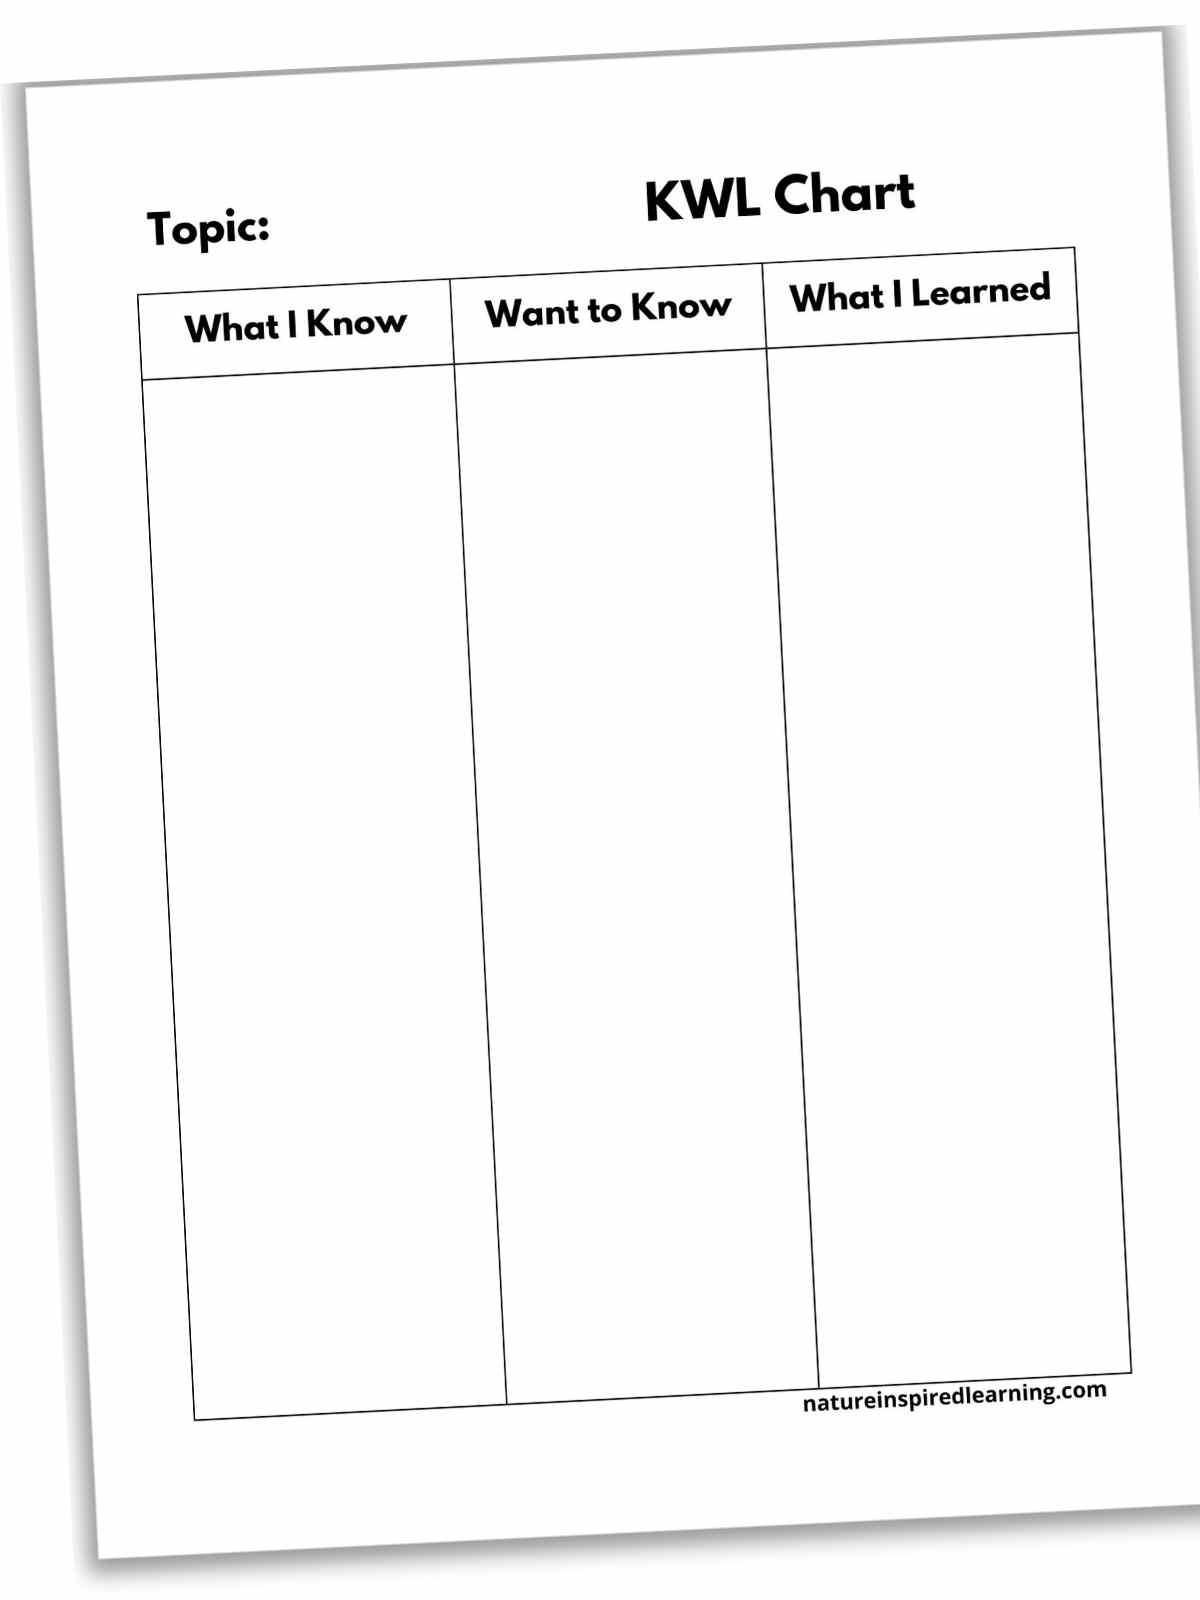 vertical chart with topic, a title, and headings for the three columns.